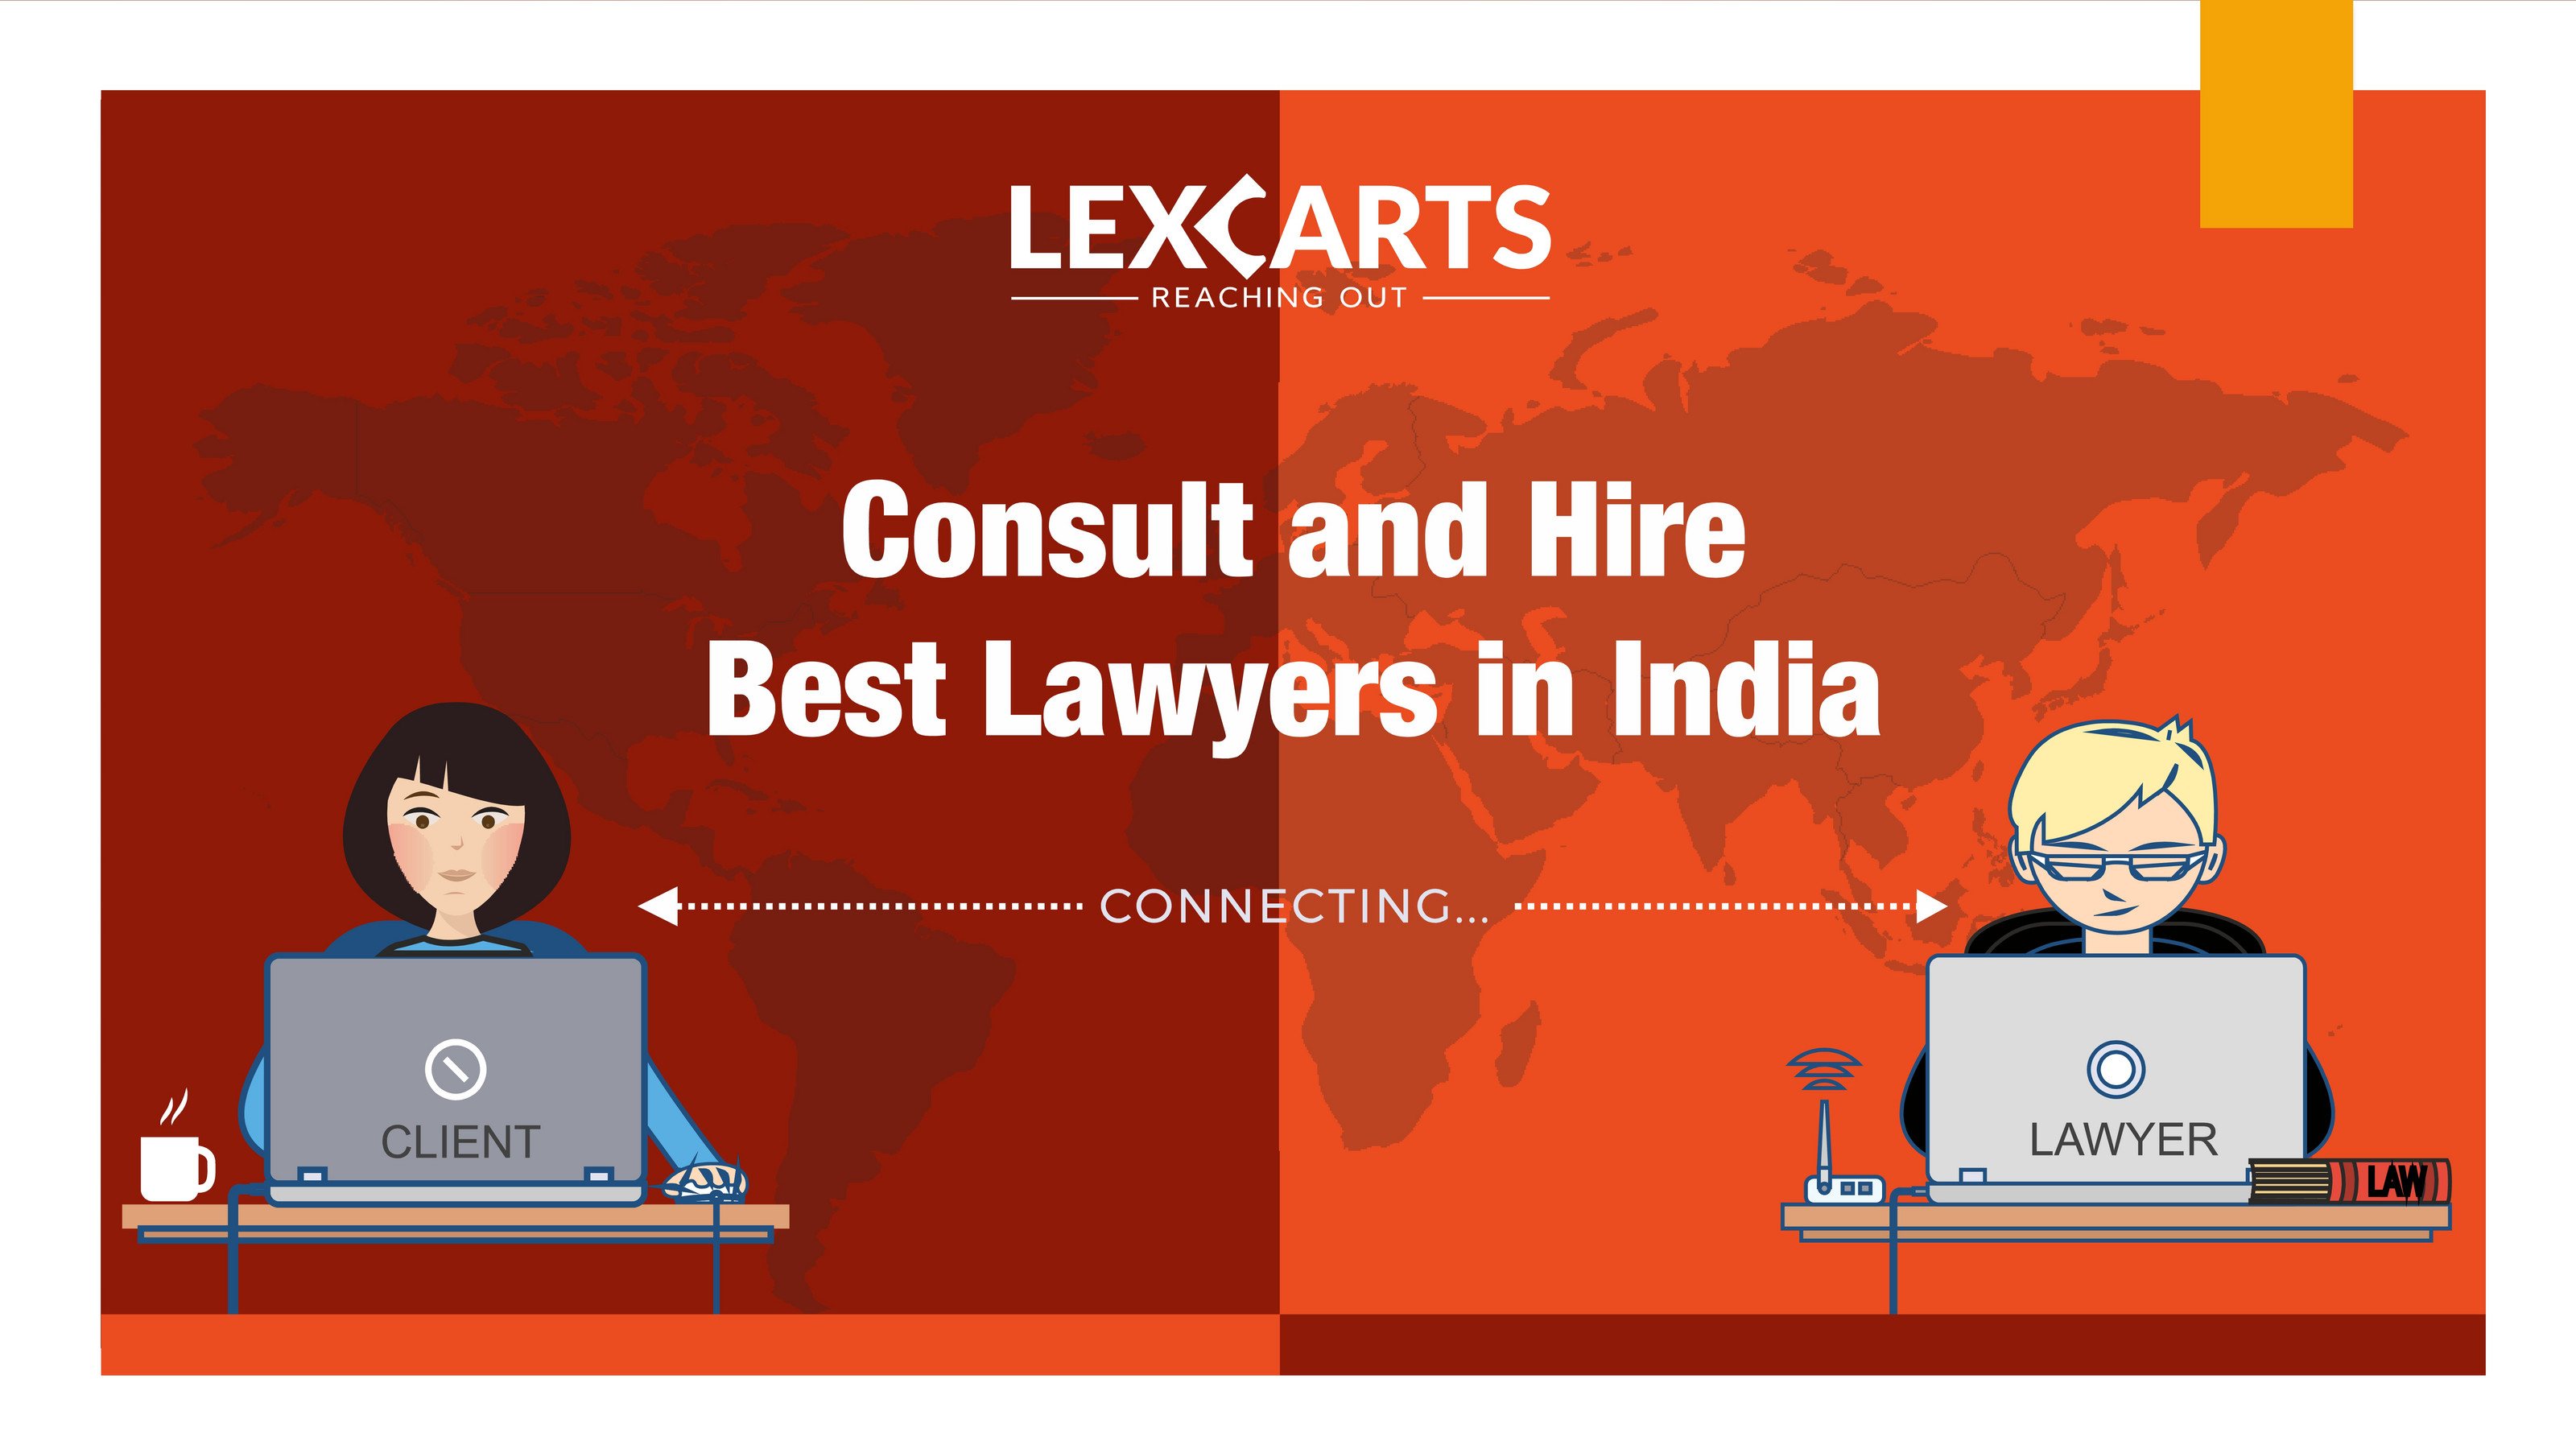 Lexcarts - Consult &amp;amp; Hire Best Lawyers in India | Lexcarts Presentation - Page 2-3 - Created with Publitas.com